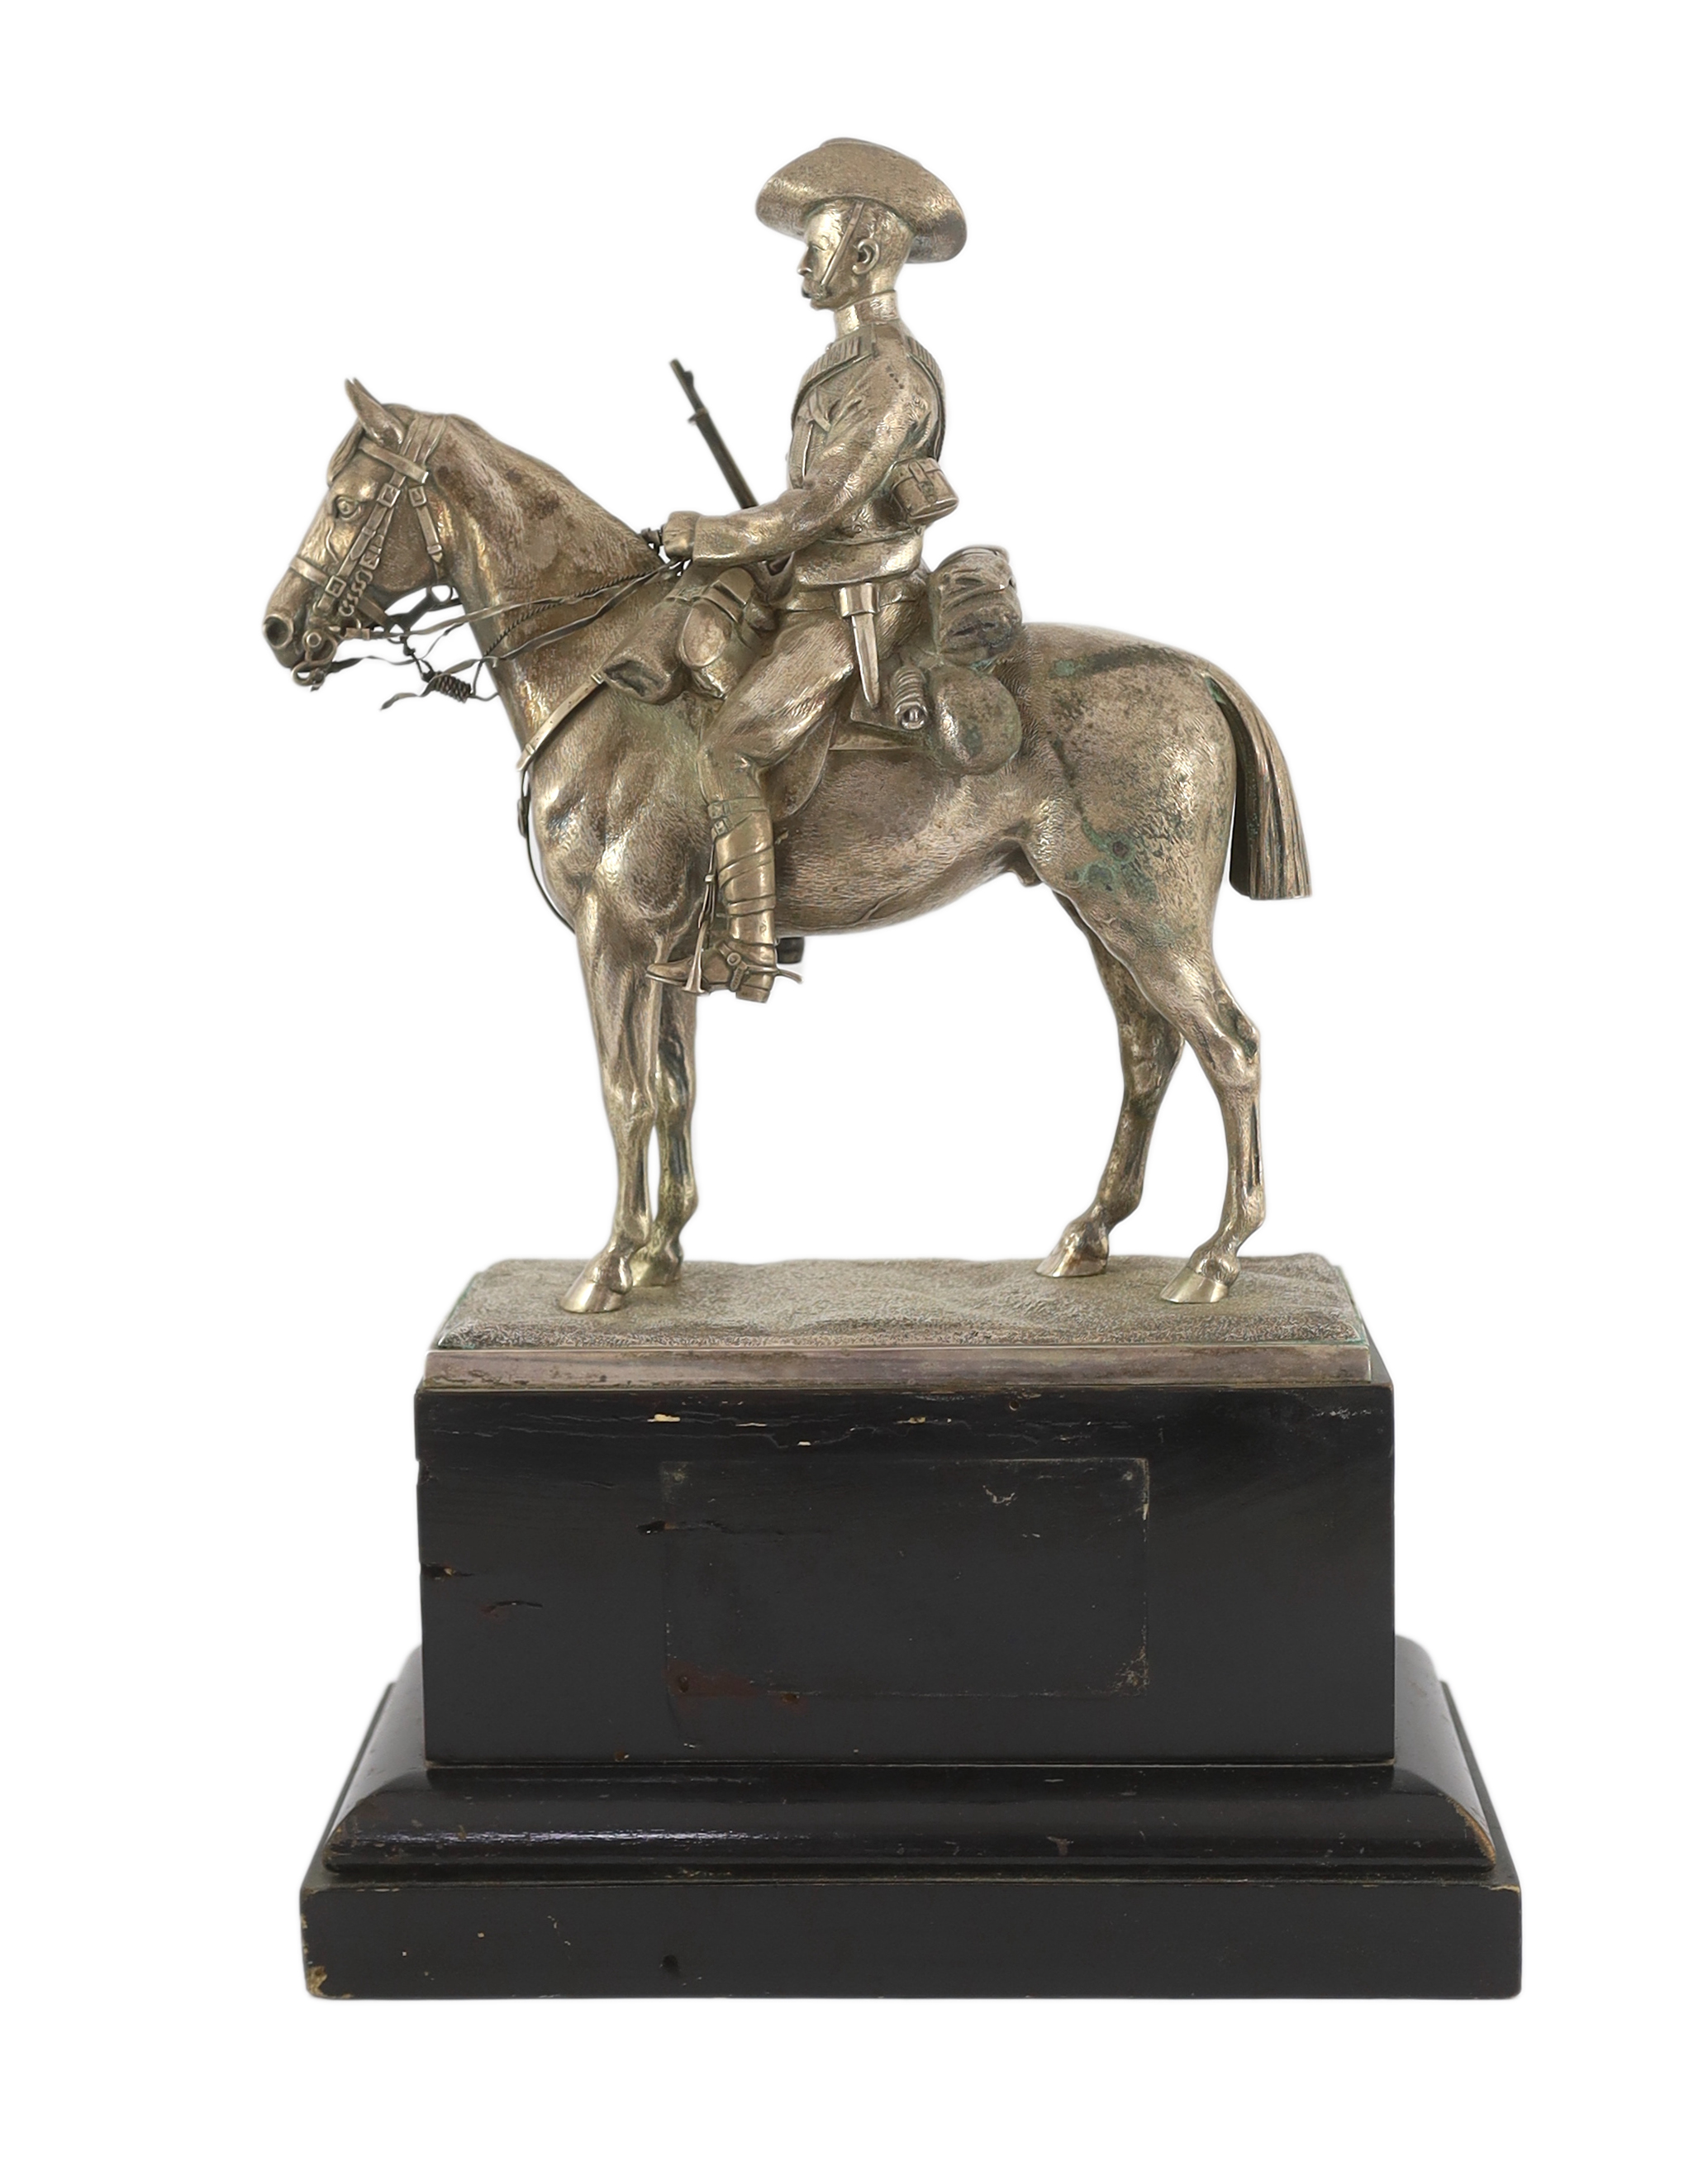 An early 20th century silver model of a City Imperial Volunteer, holding a rifle, on horseback